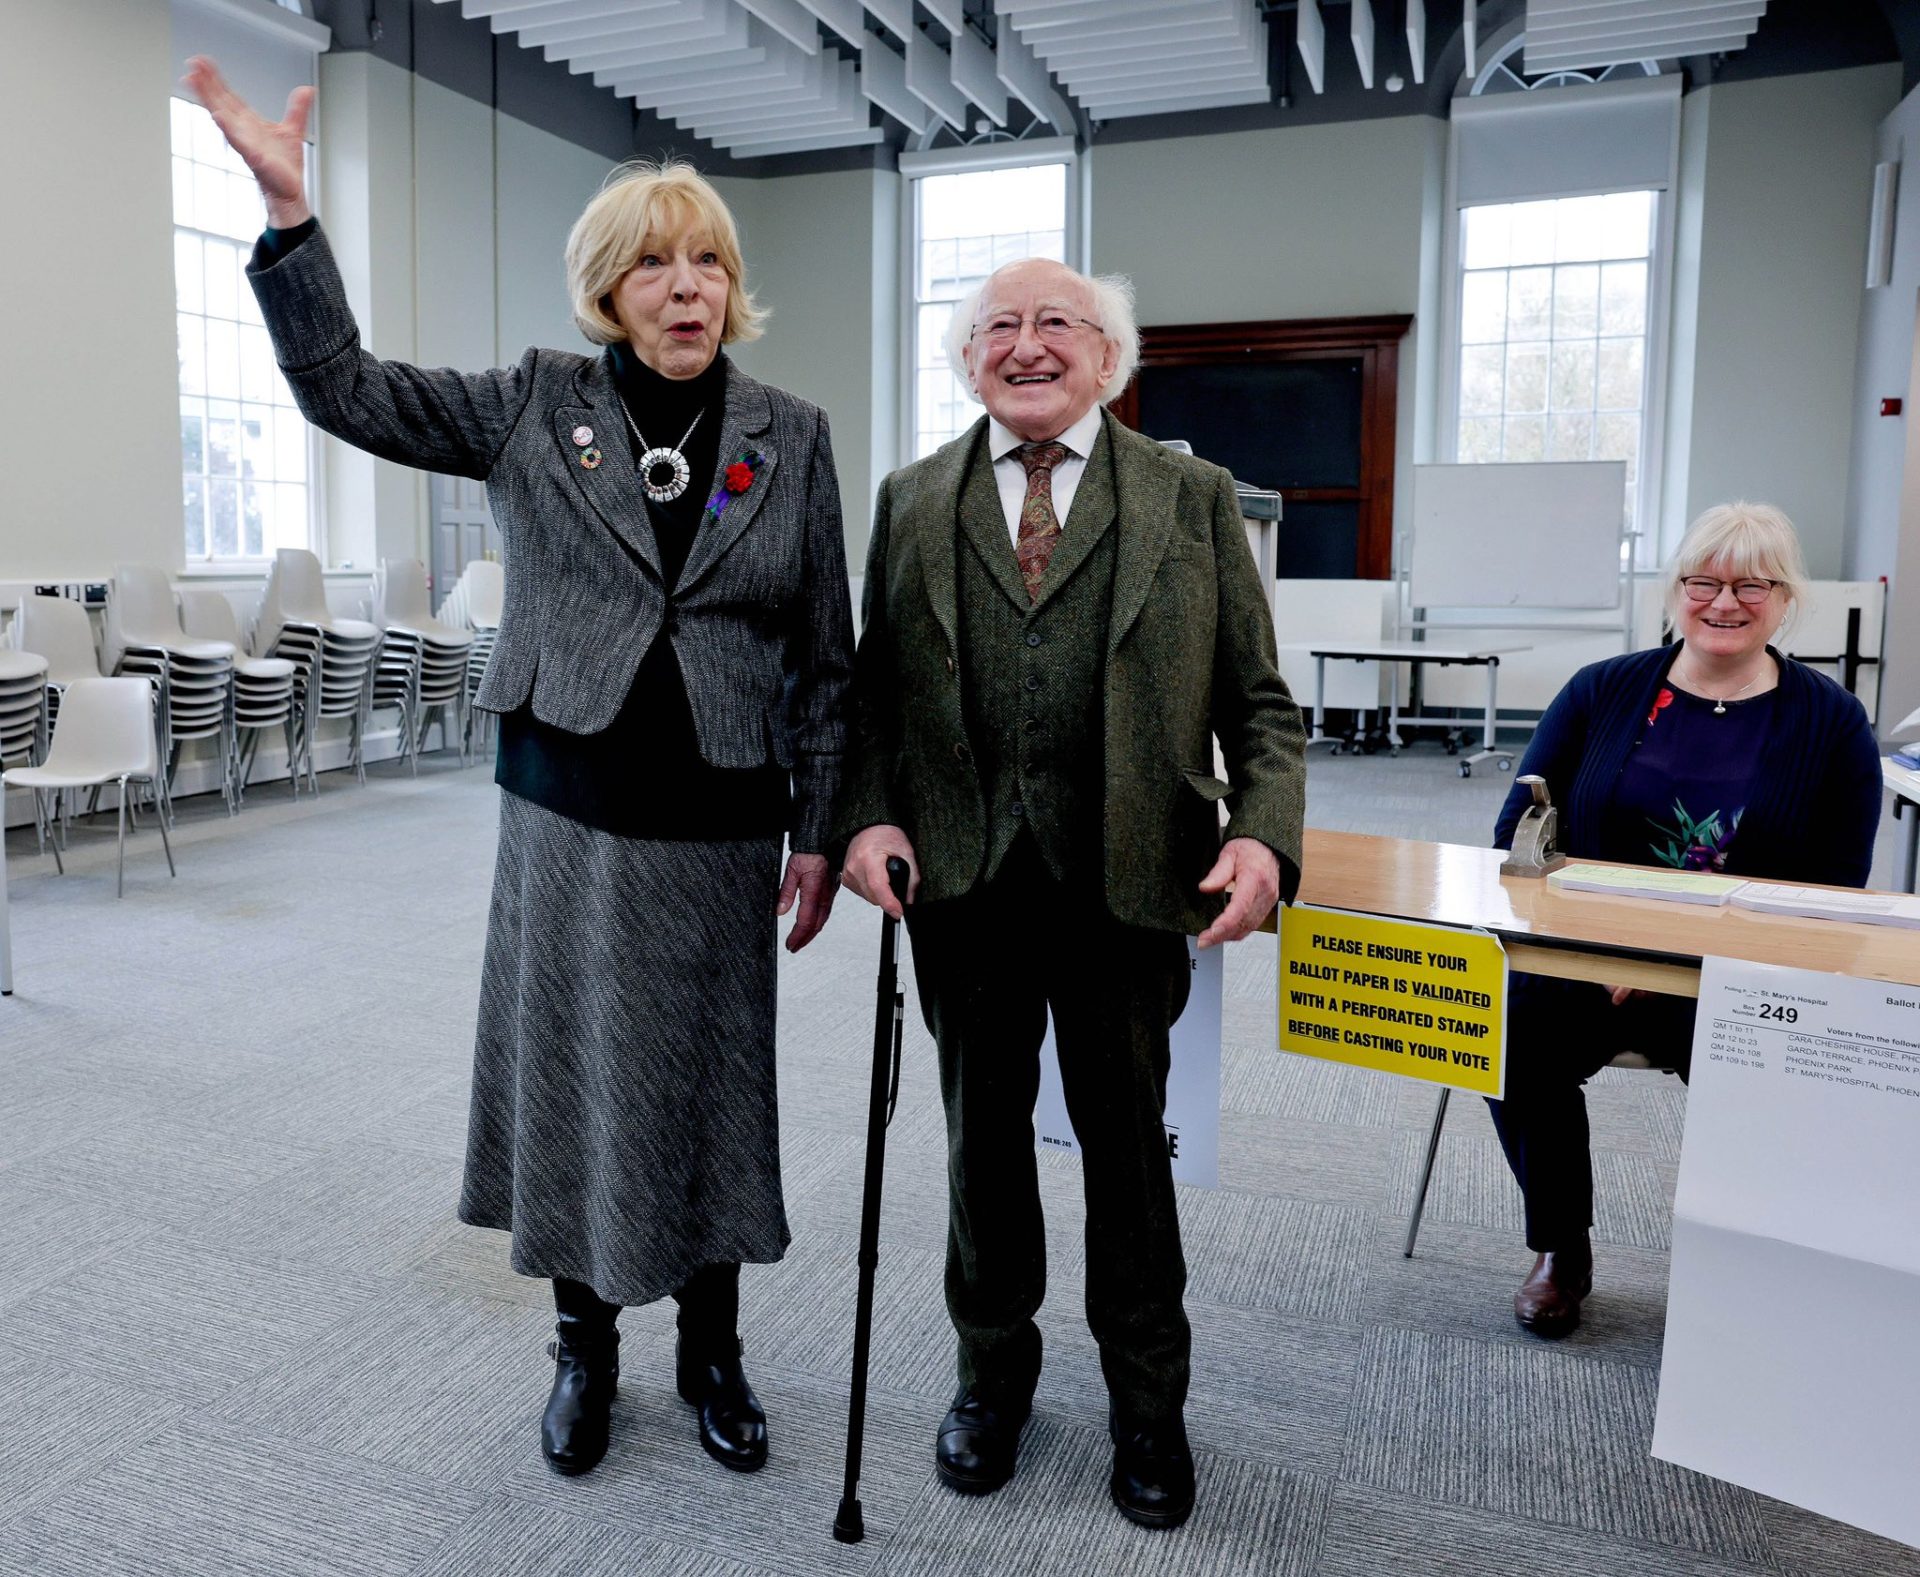 President Michael D Higgins and Sabina Higgins vote in the Family and Care referendums in Dublin's Phoenix Park, 8-3-24. 